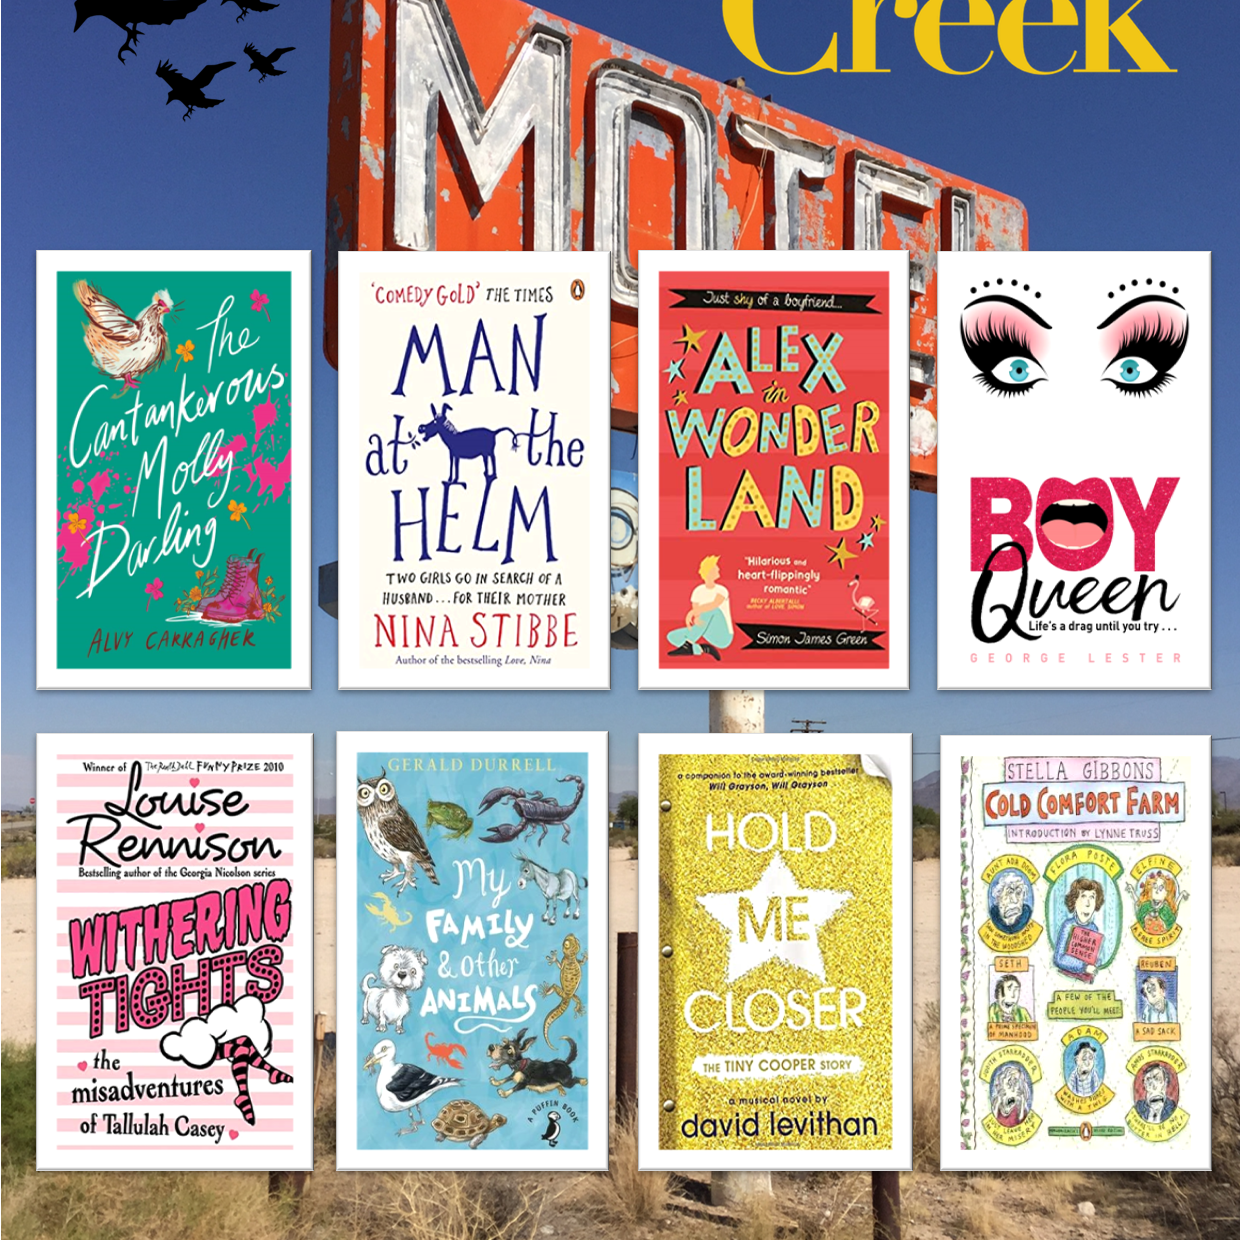 Image is of 8 YA books that may interest fans of Schitt's Creek.